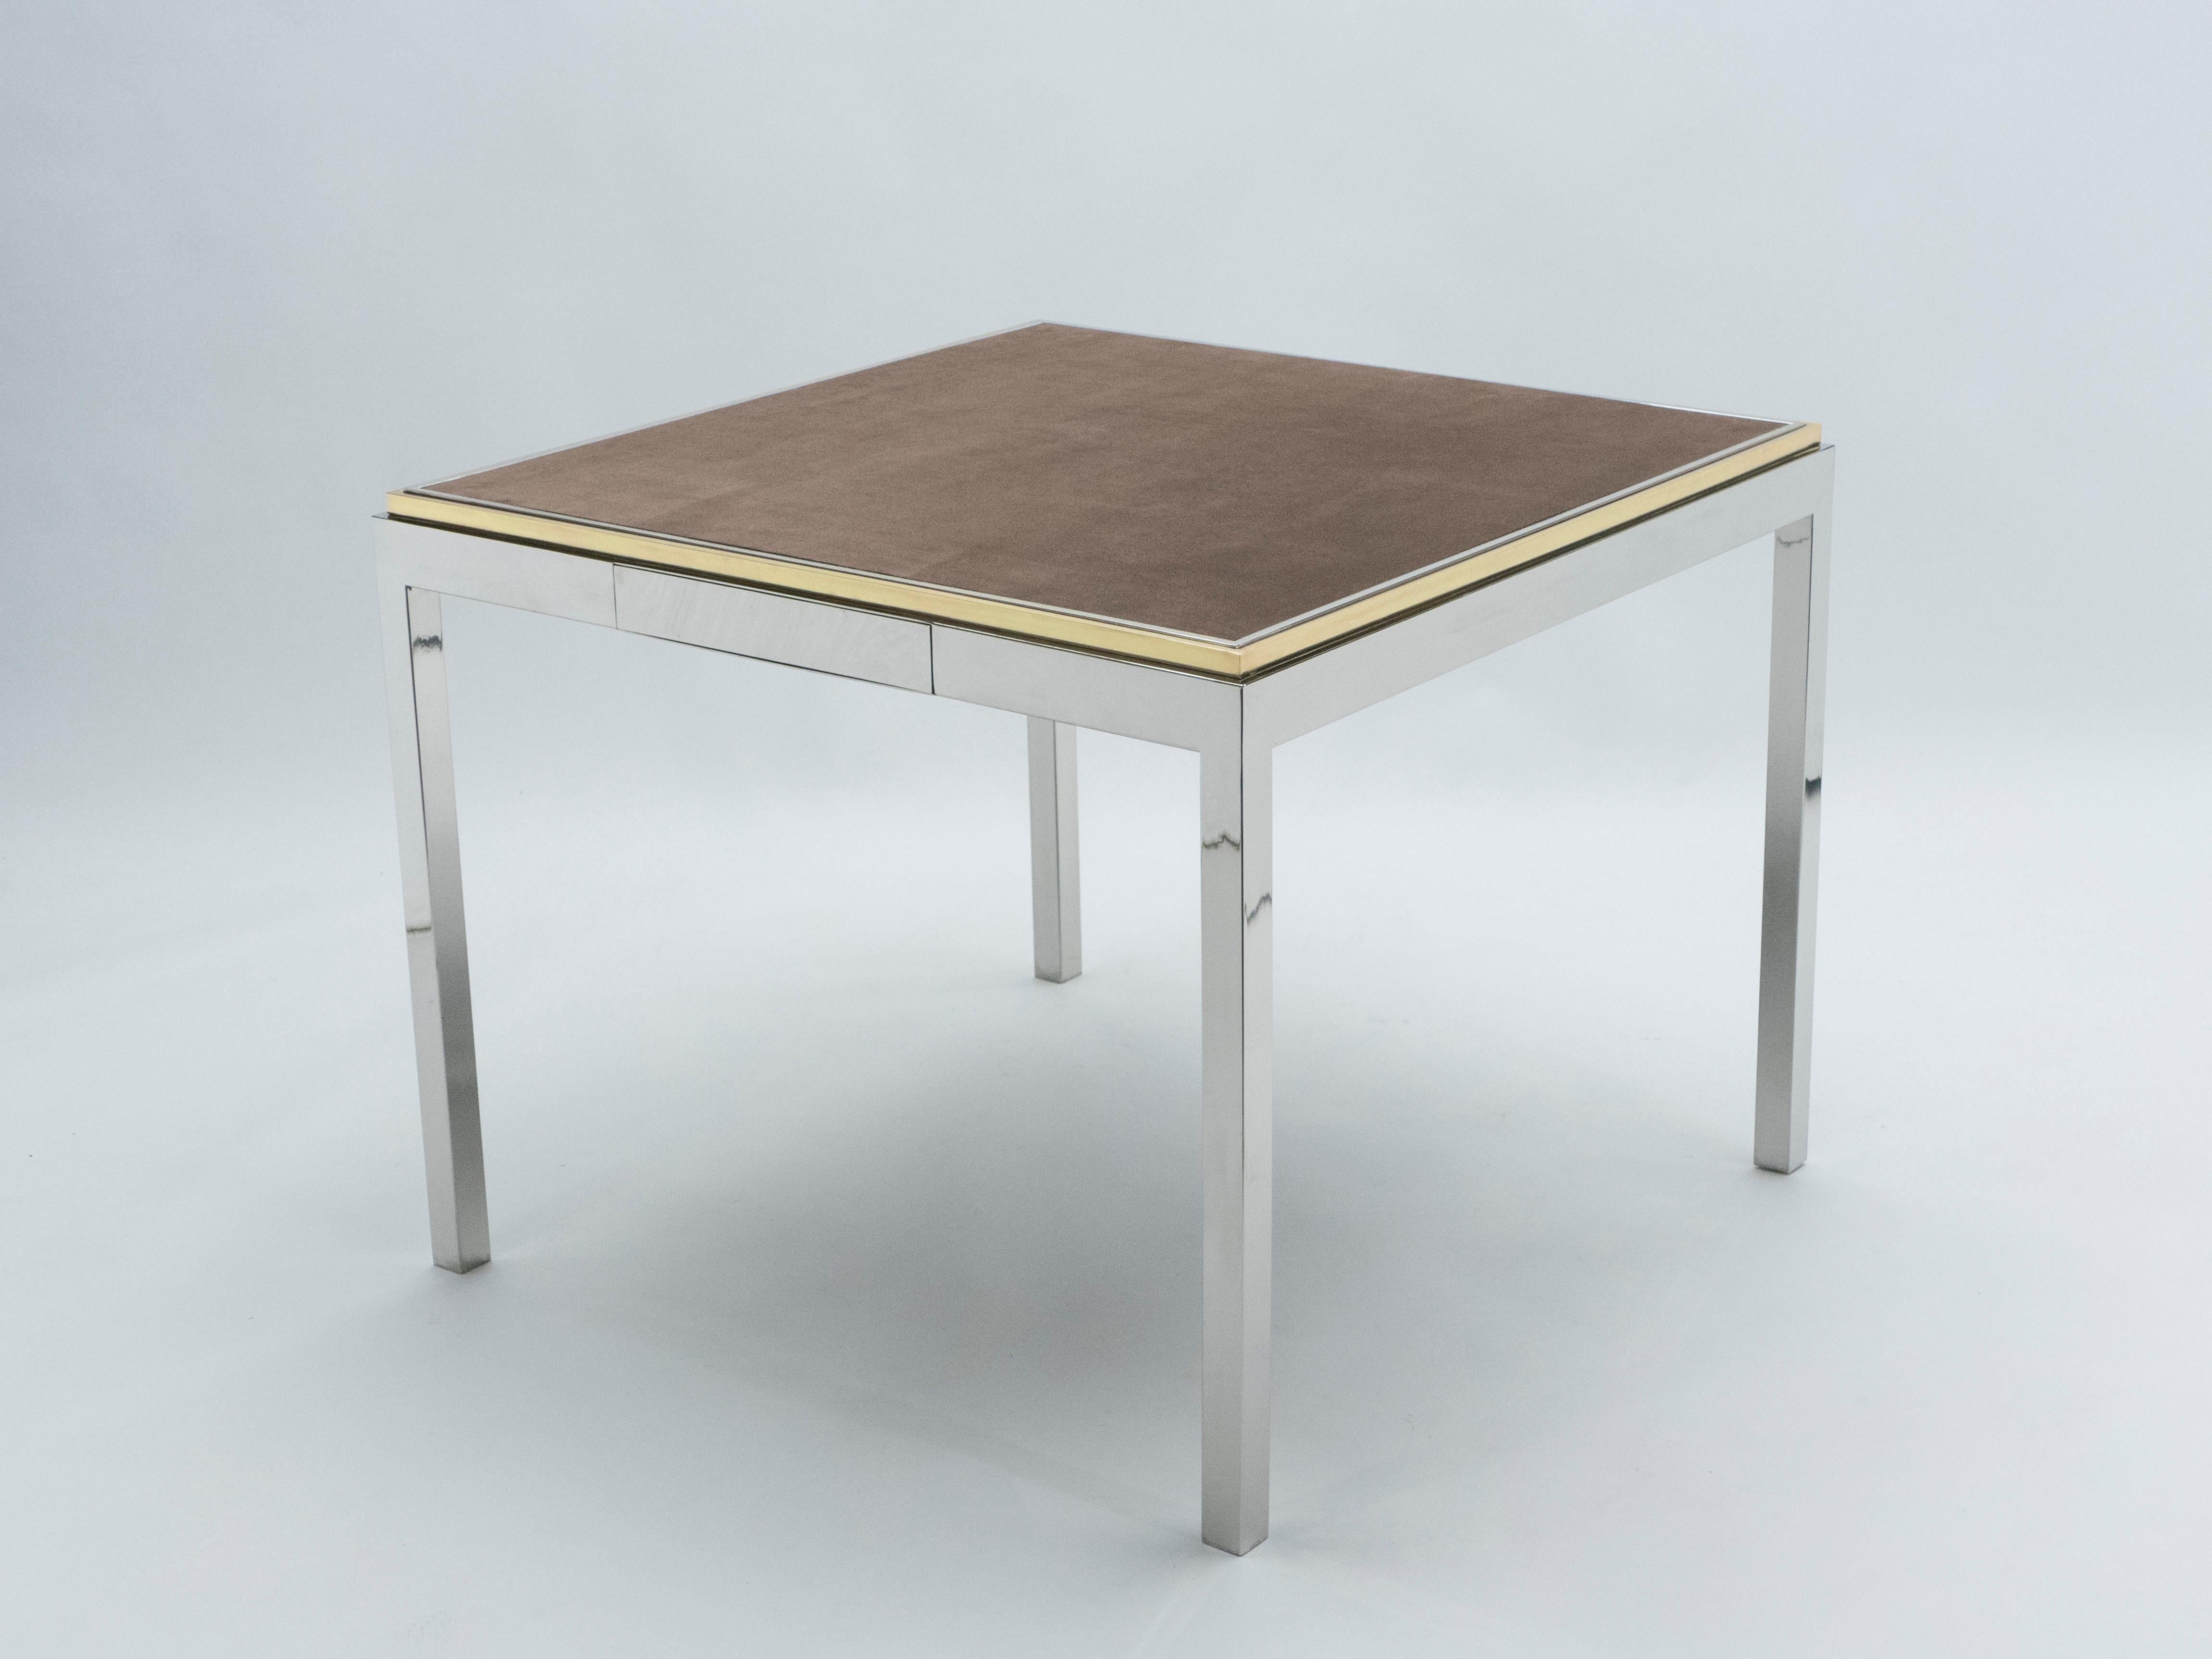 Late 20th Century Willy Rizzo Lacquered Chrome Brass Flaminia Game Table, 1970s